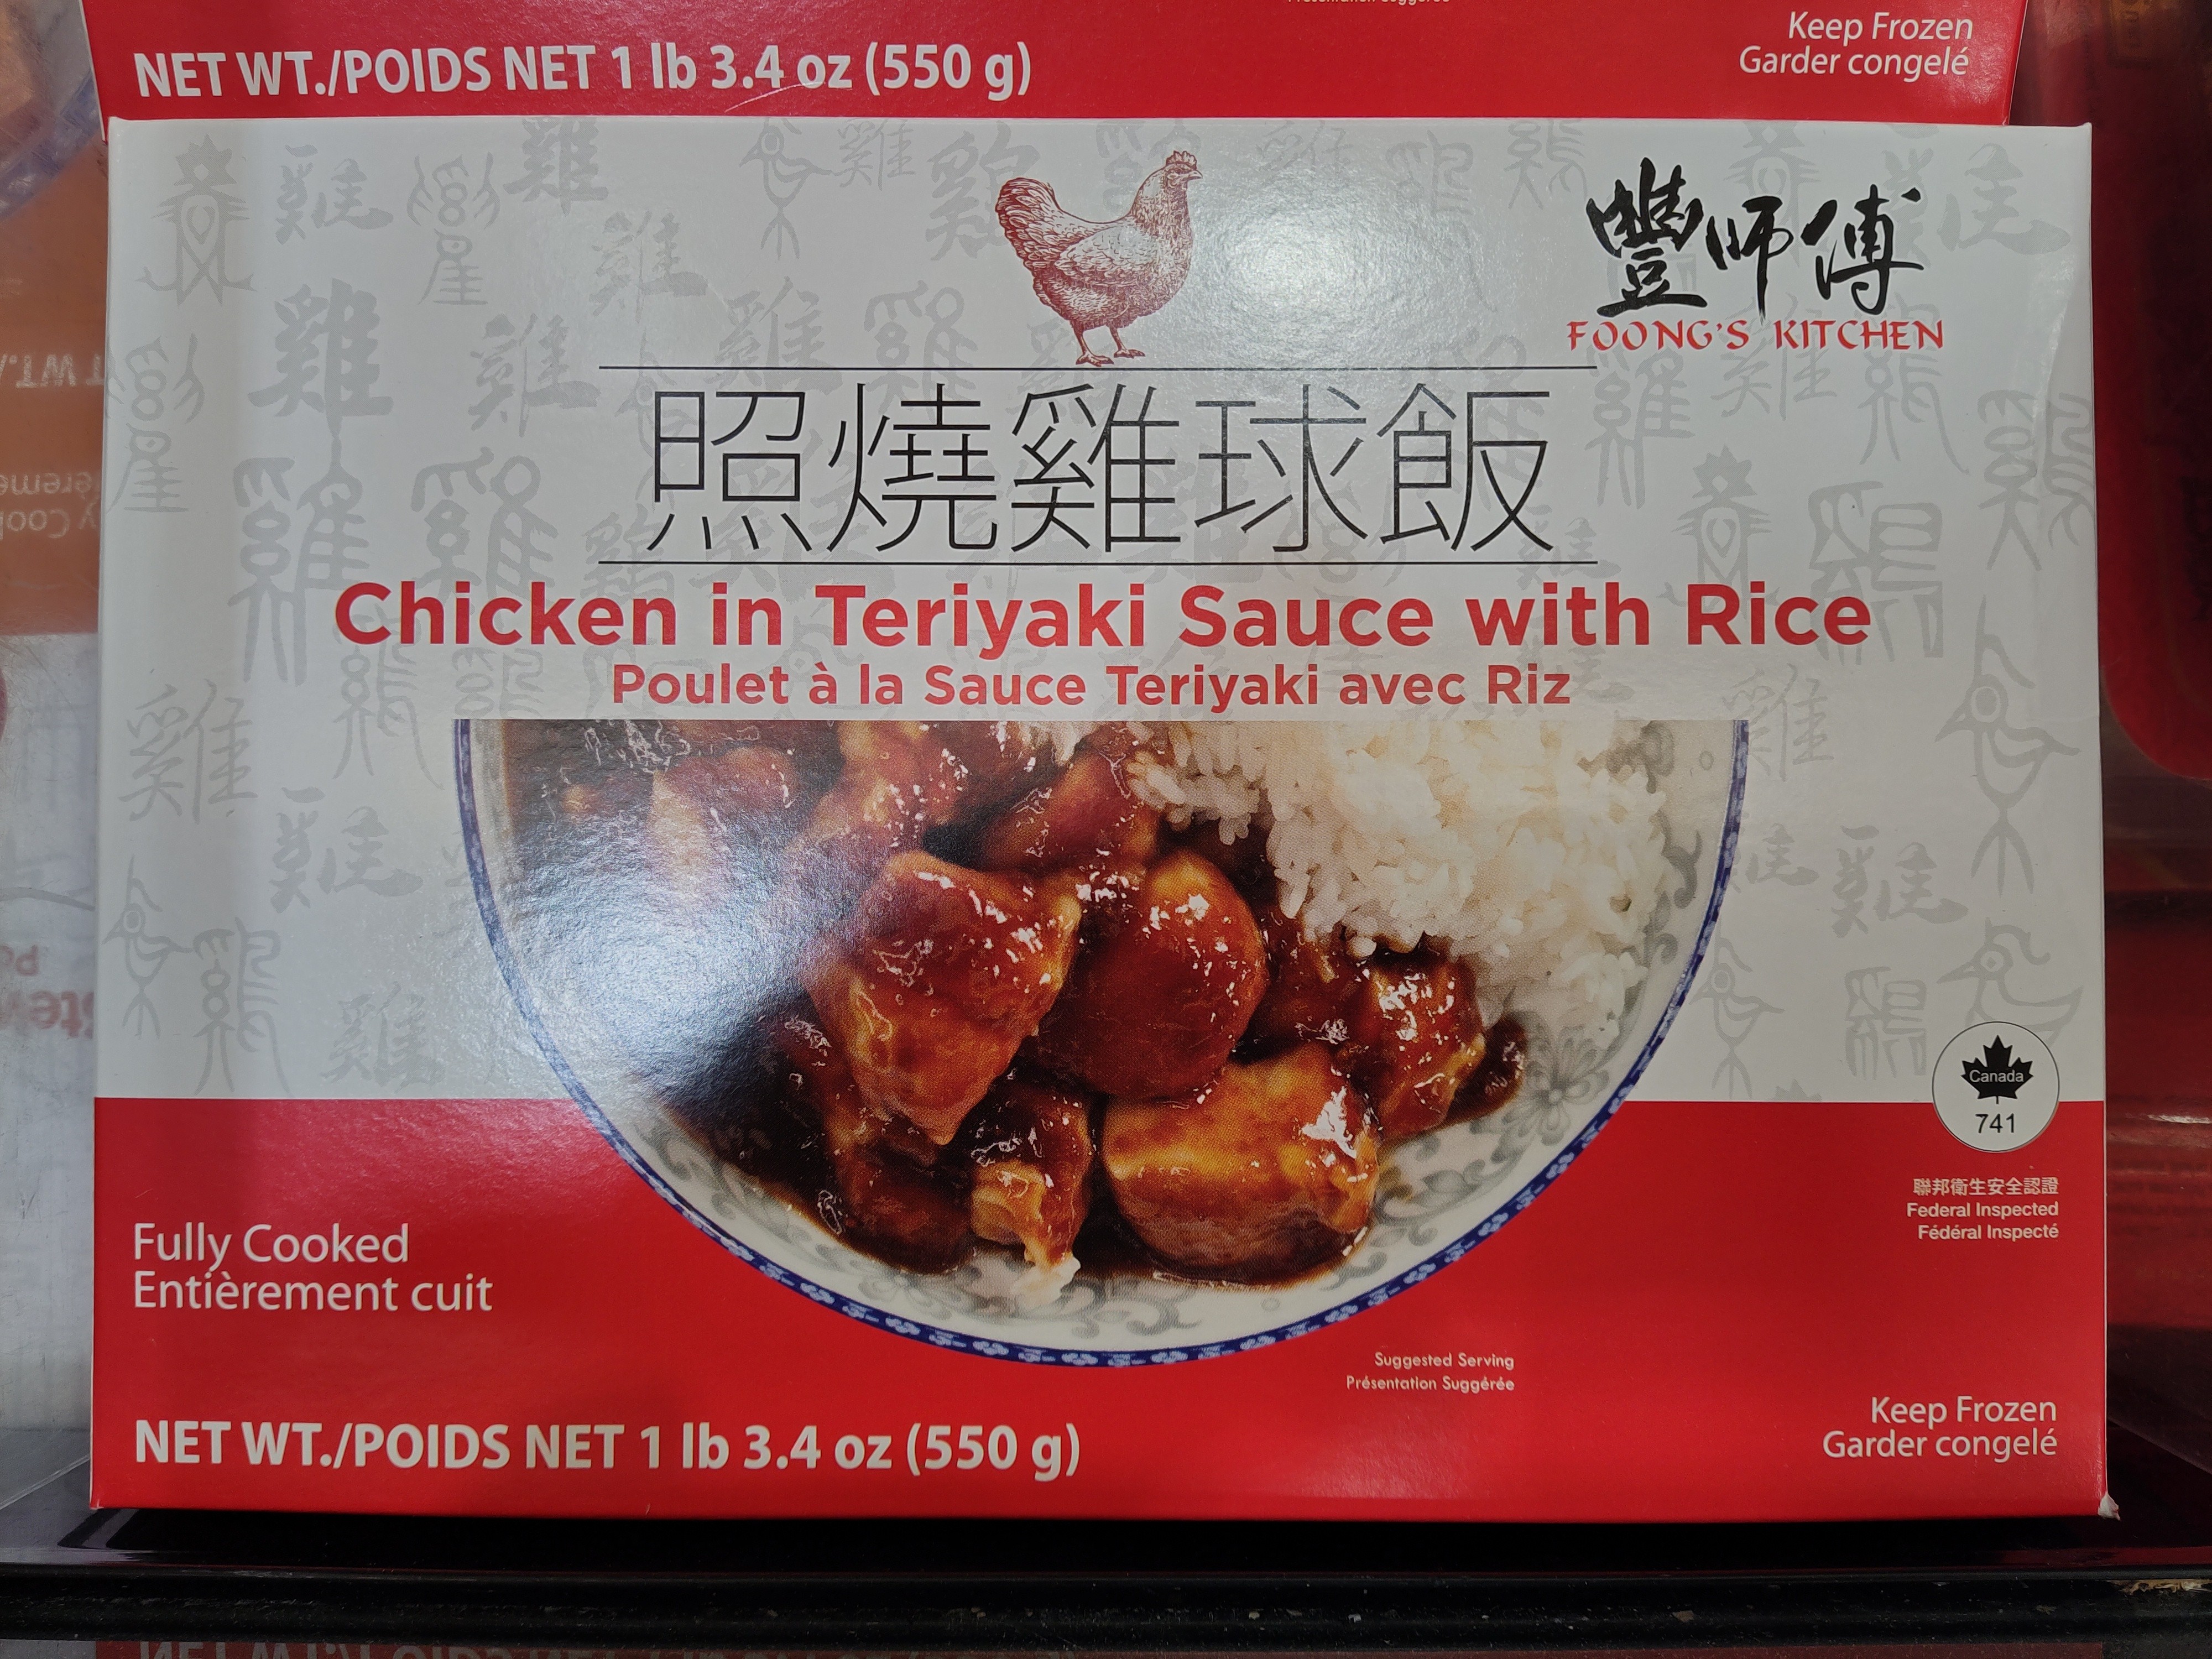 foongs-kitchen-chicken-in-teriyaki-sauce-with-rice